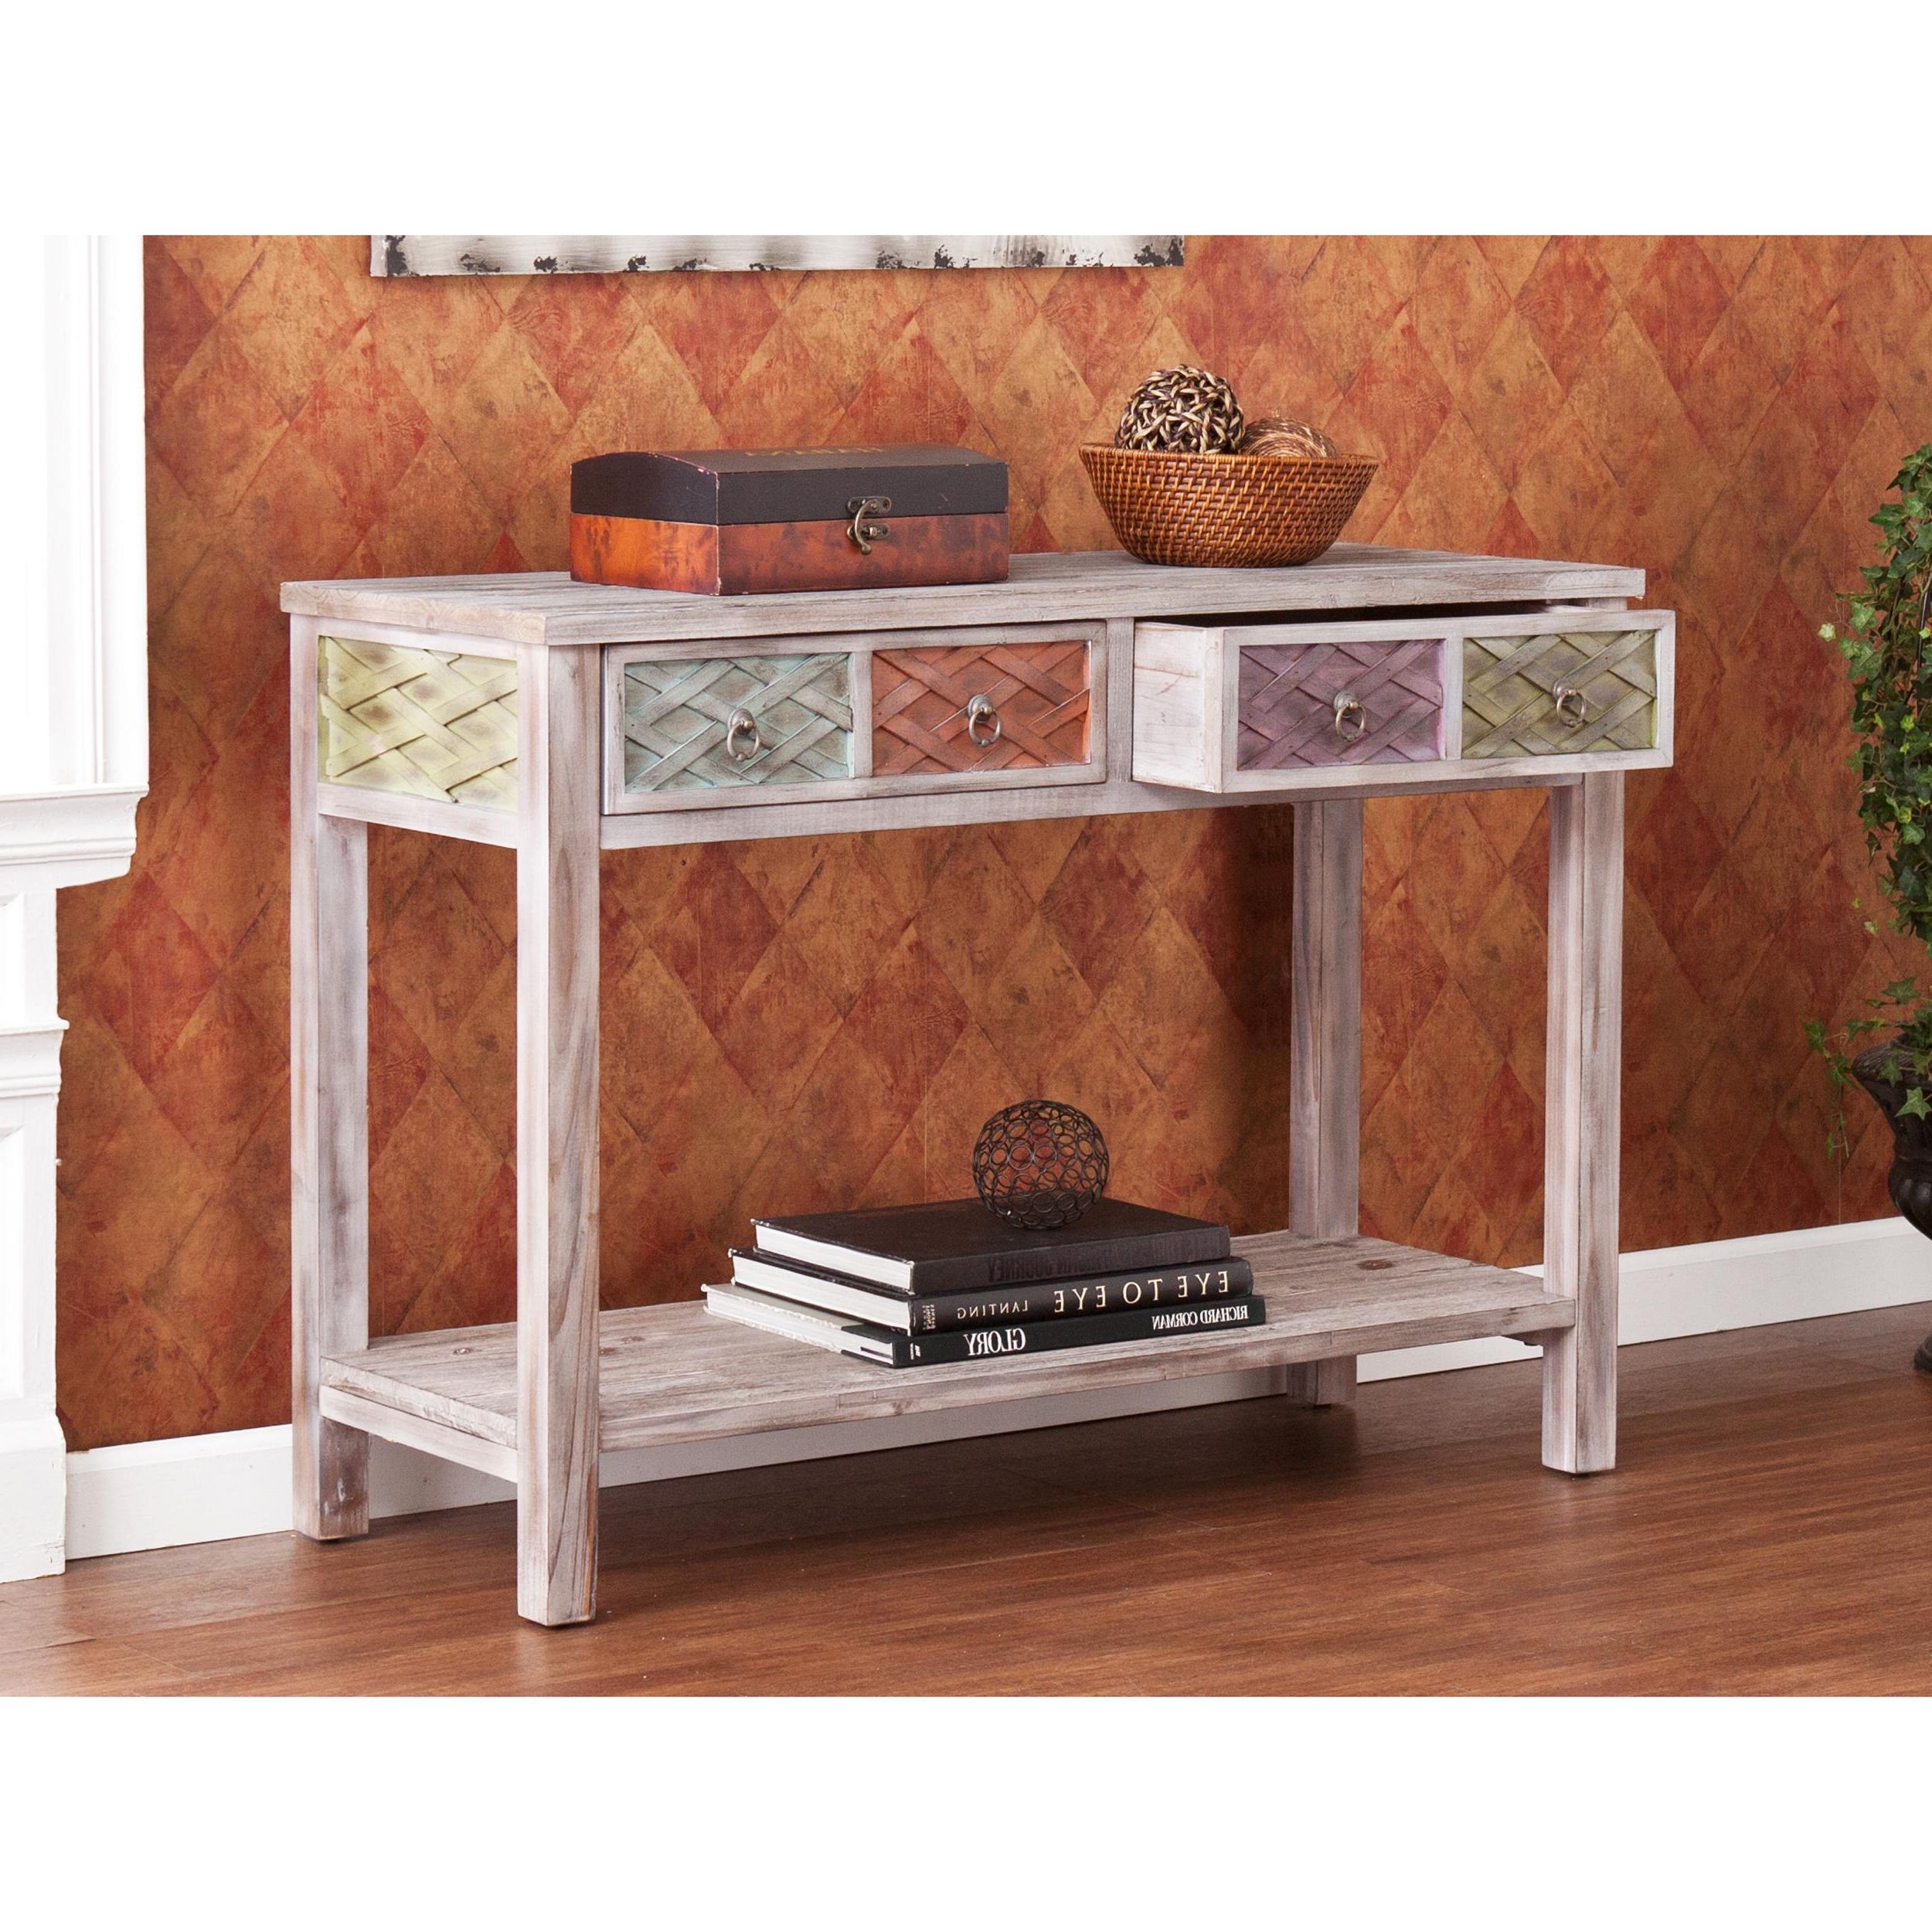 Oceanside White Washed Console Tables Throughout Current Amazon: Southern Enterprises Dharma Console Table (View 4 of 10)